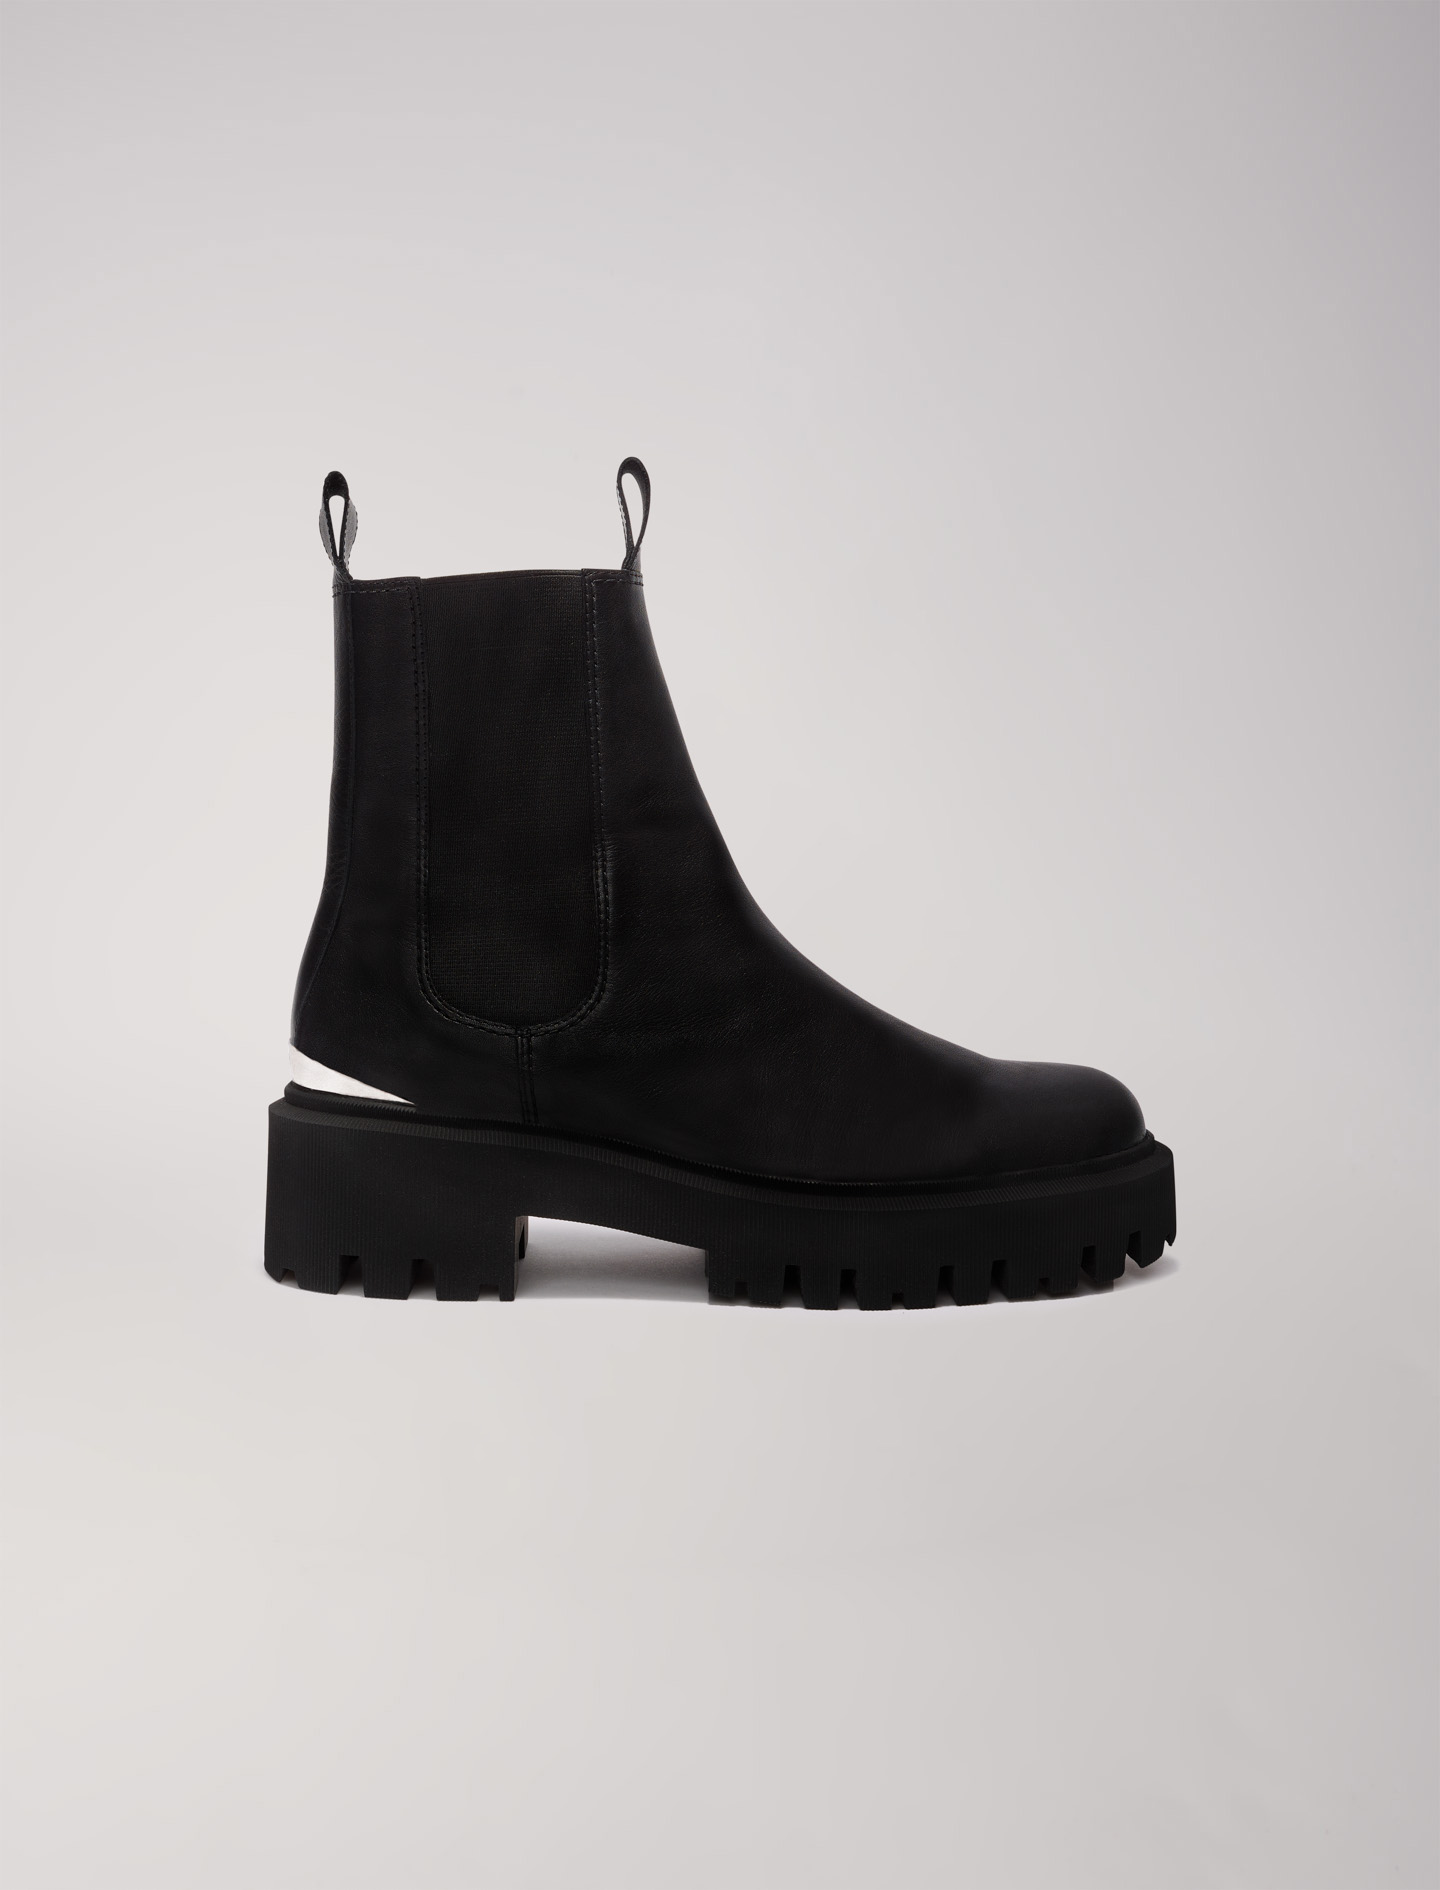 Maje Woman's goat Elastic: Platform Chelsea boots for Fall/Winter, in color Black / Black